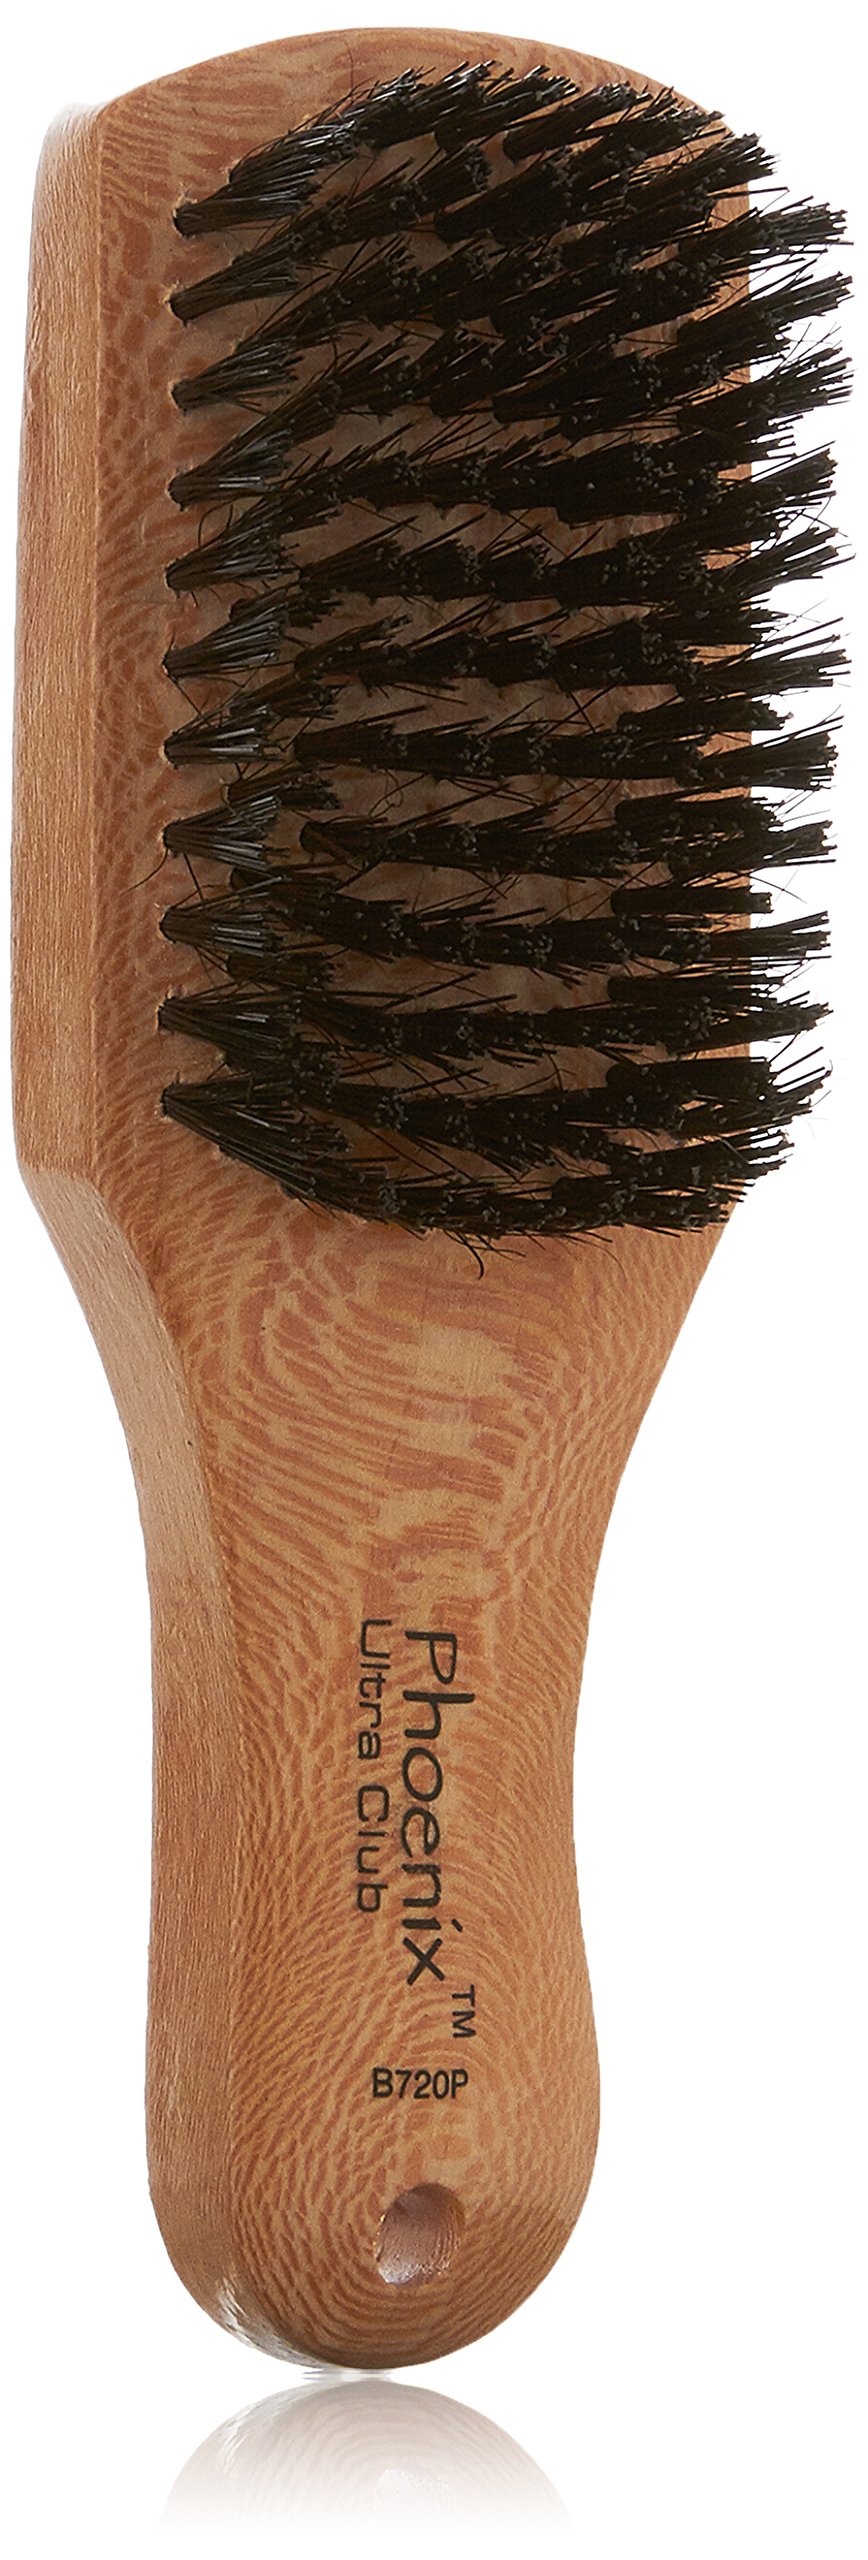 Luxor Pro Phoenix Ultra Club Premium Contoured Men's Club Brush UPC #  7366582720 MADE IN THE USA : Wholesale fashion accessories and jewelry,  bows - clips - scrunchies - twisters - keychains -